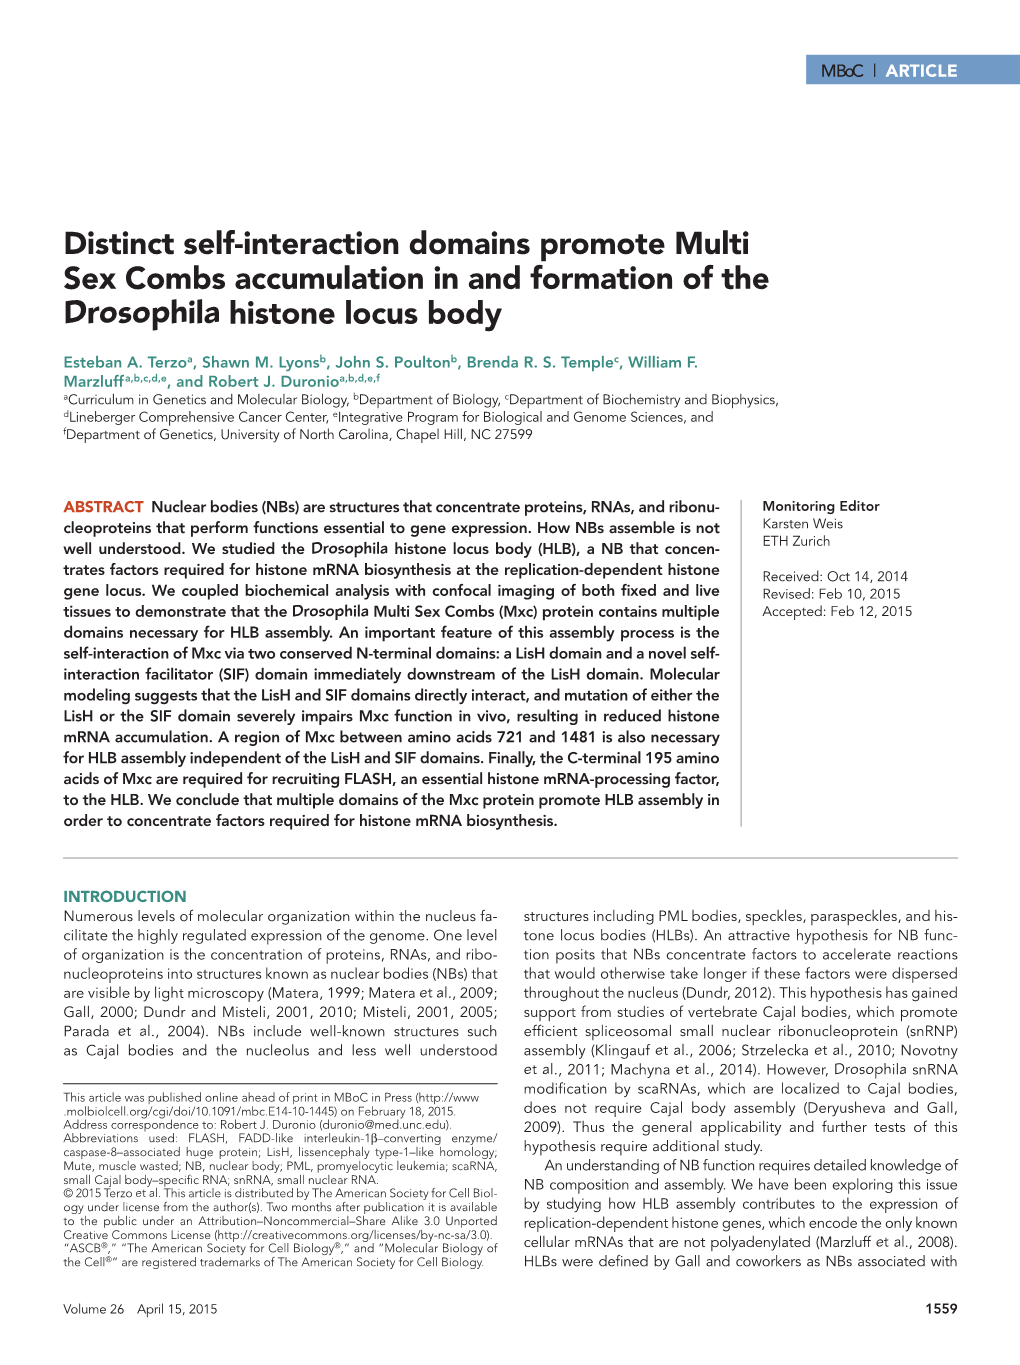 Distinct Self-Interaction Domains Promote Multi Sex Combs Accumulation in and Formation of the Drosophila Histone Locus Body